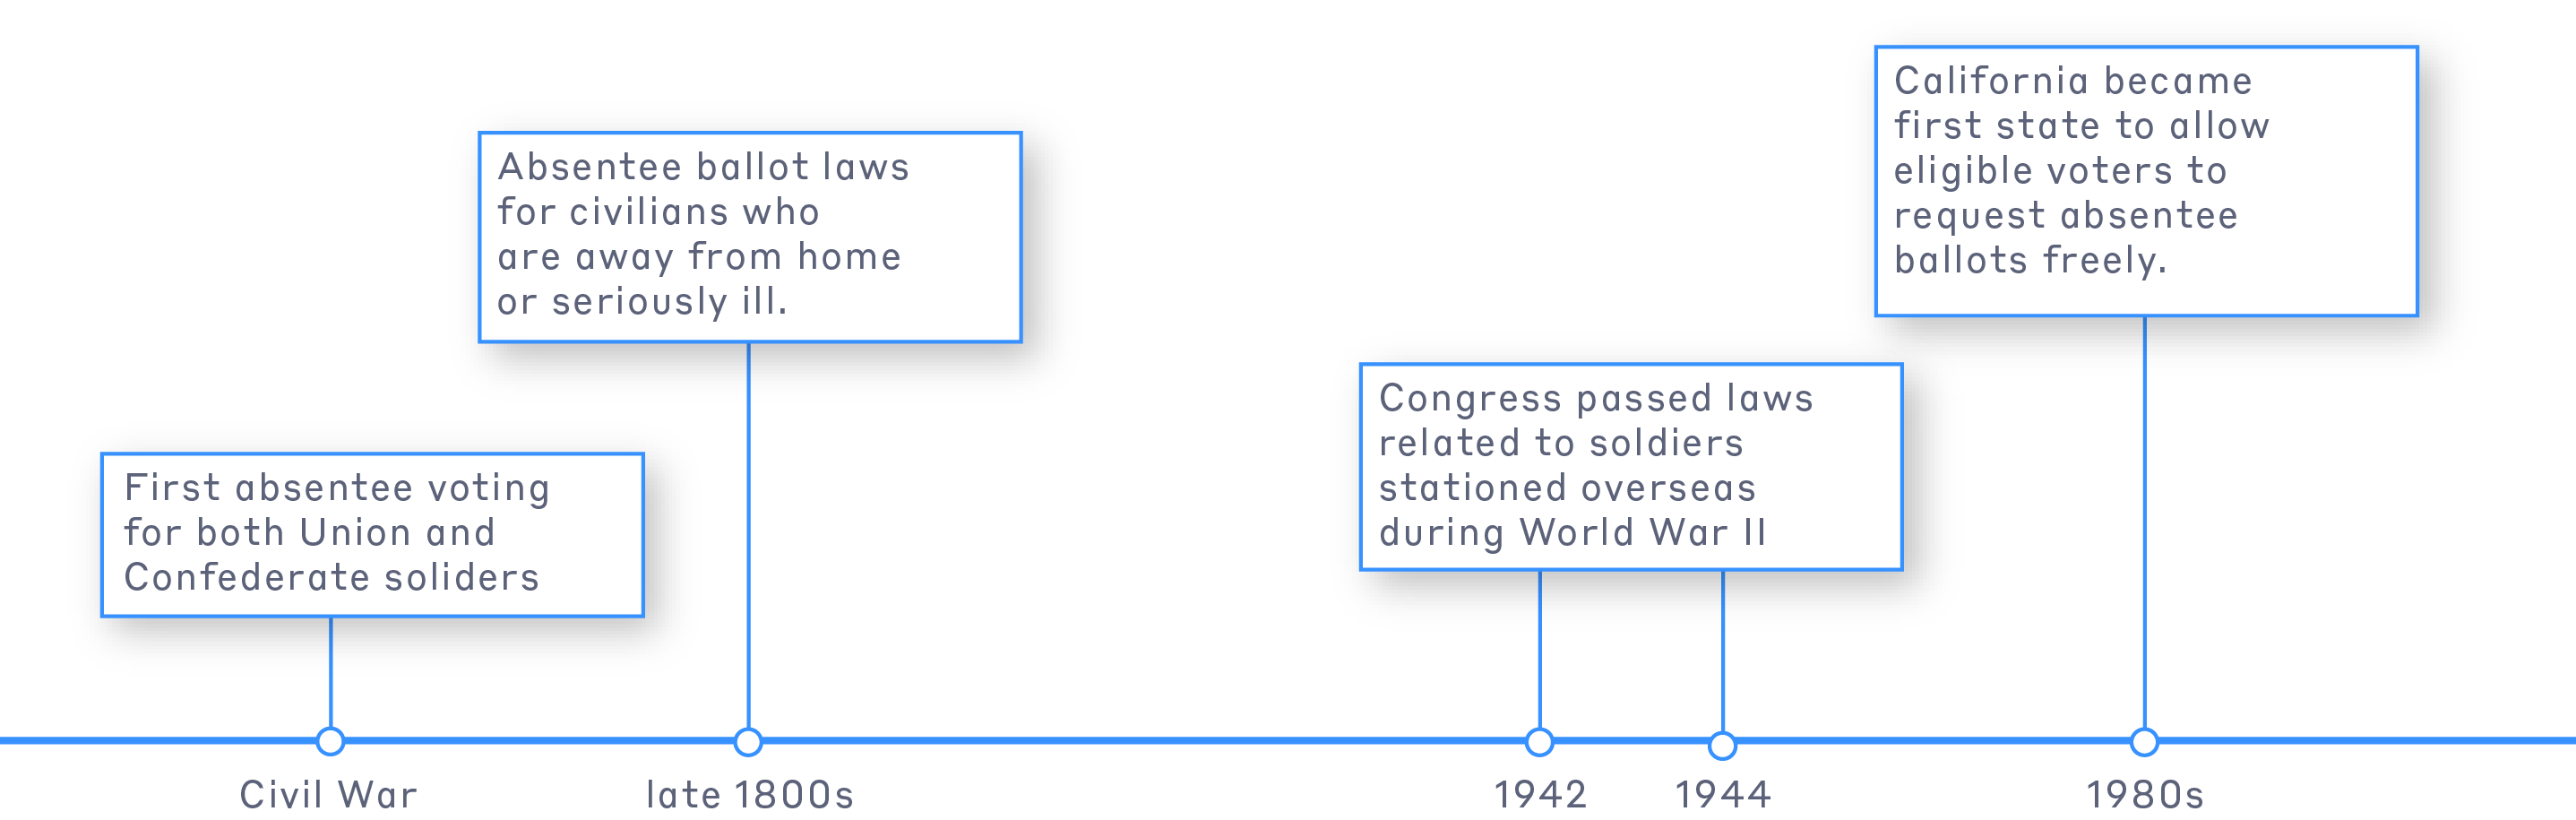 Voting absentee timeline